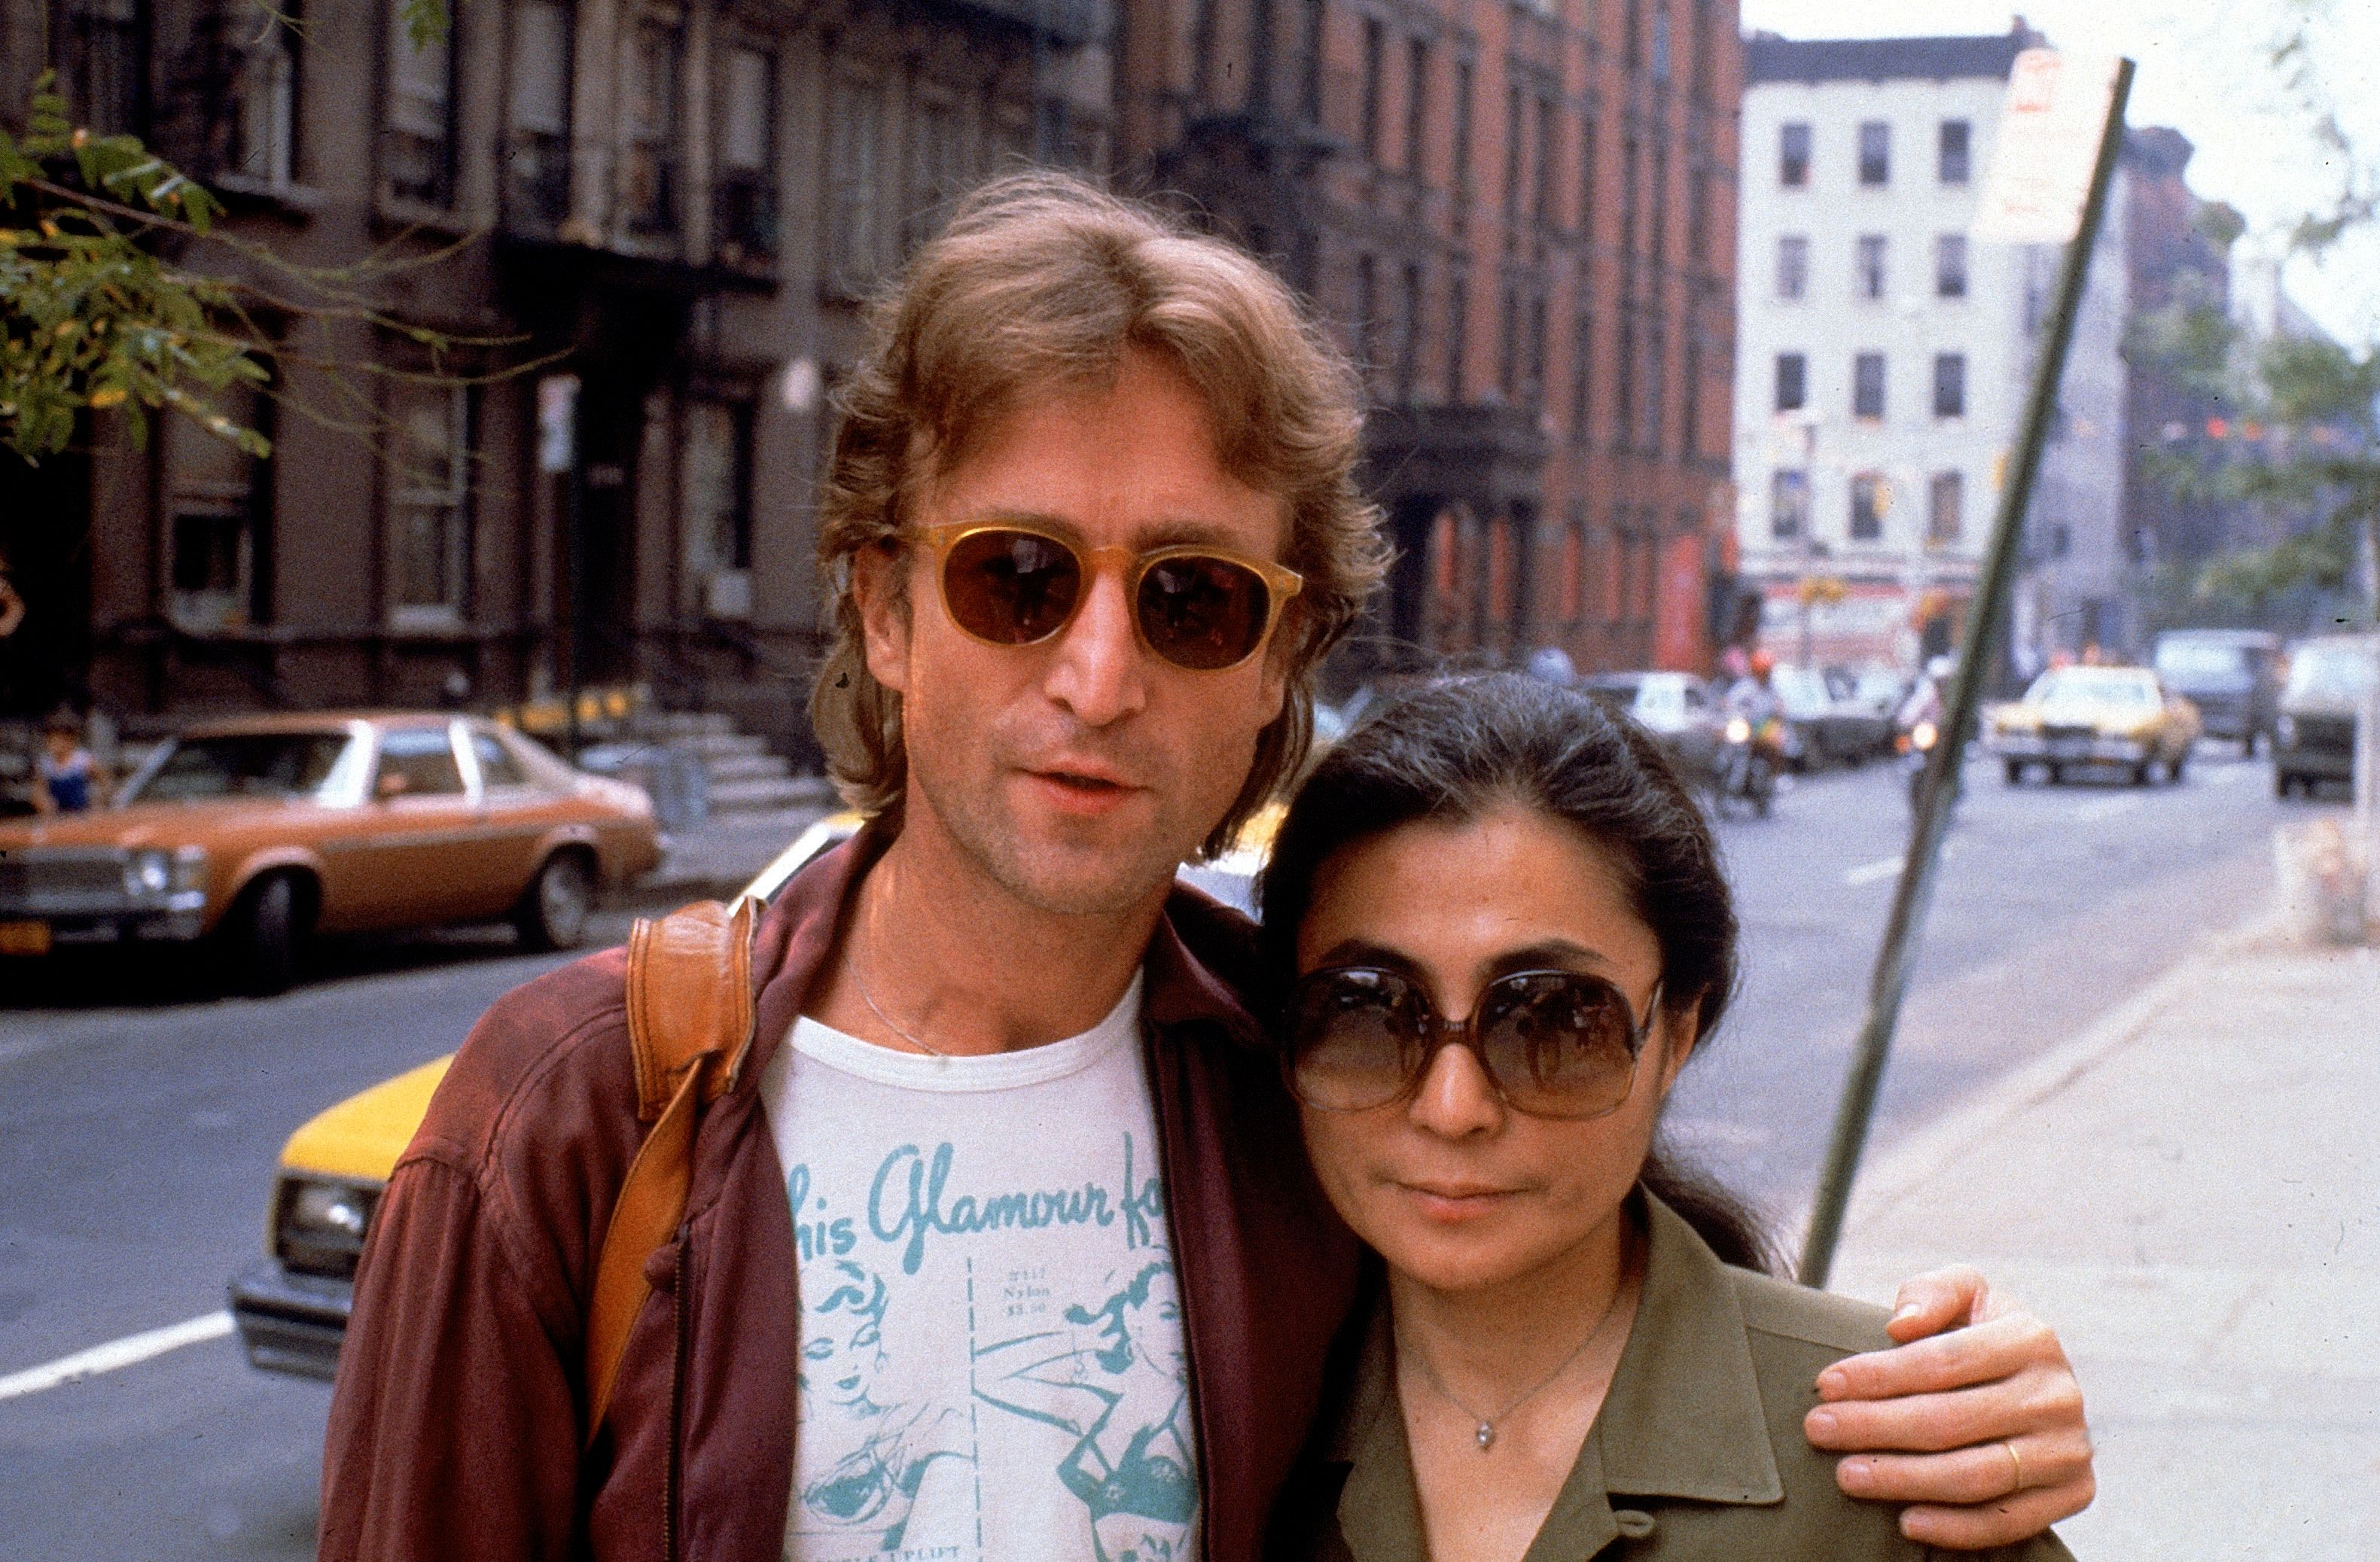 John Lennon and Yoko Ono. Image uploaded on January 01, 1980 | Photo: David Mcgough/DMI/The LIFE Picture Collection/Getty Images